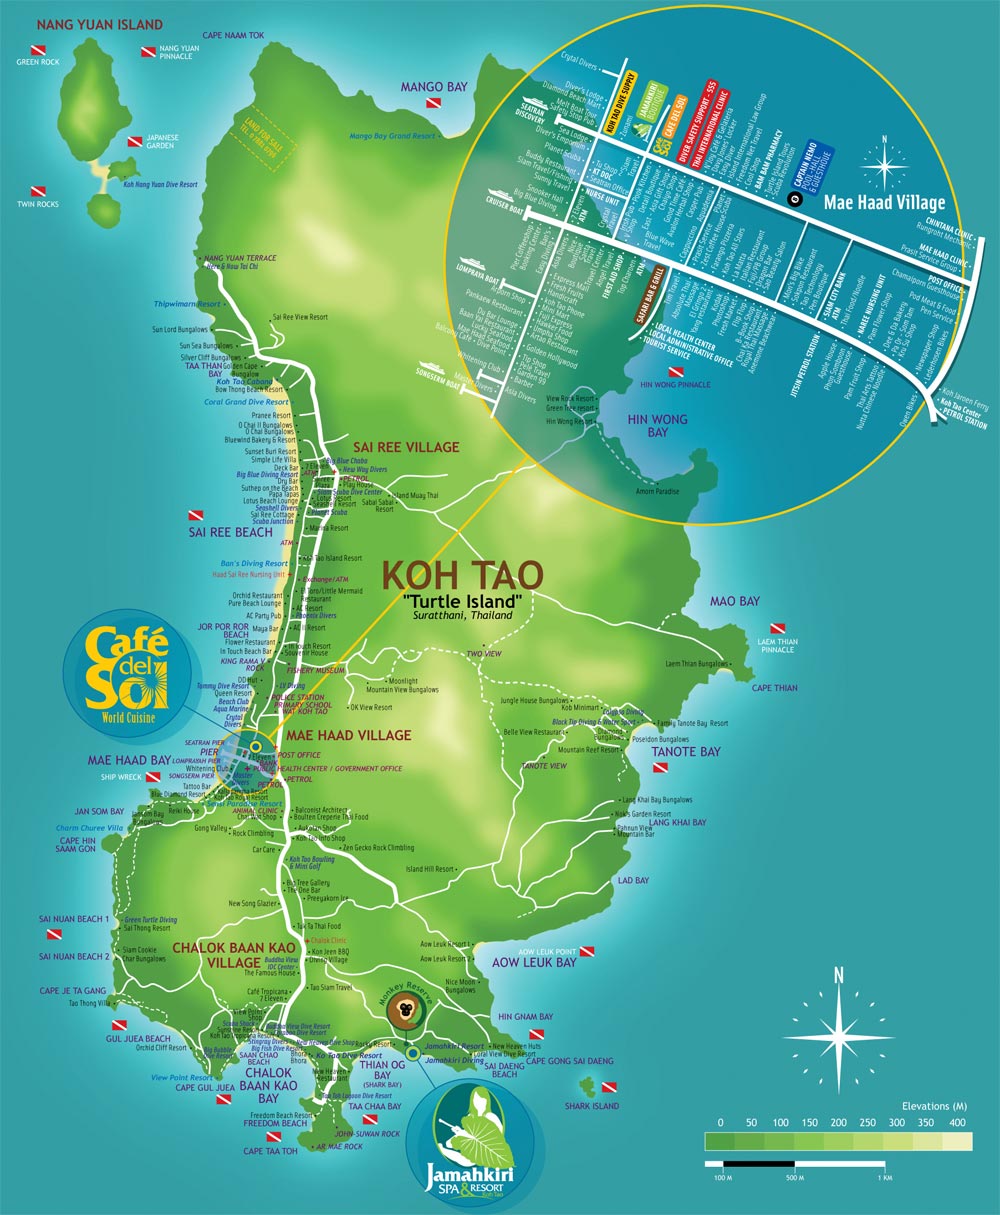 About Koh Tao.